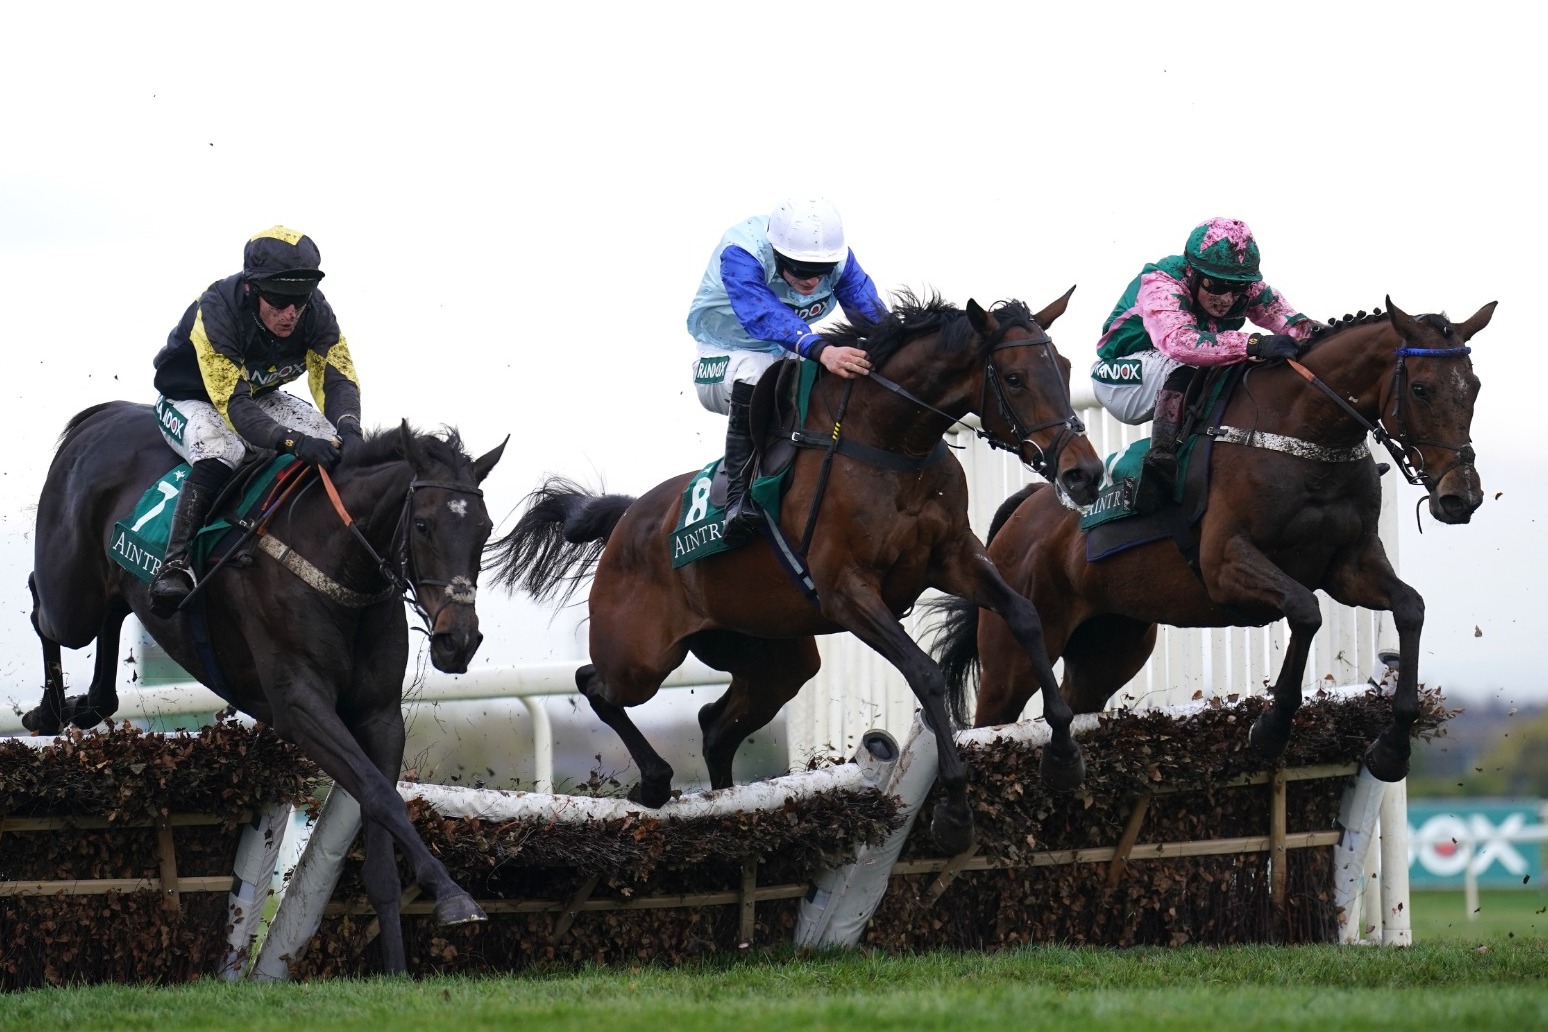 Hundreds of activists plan to disrupt Grand National 